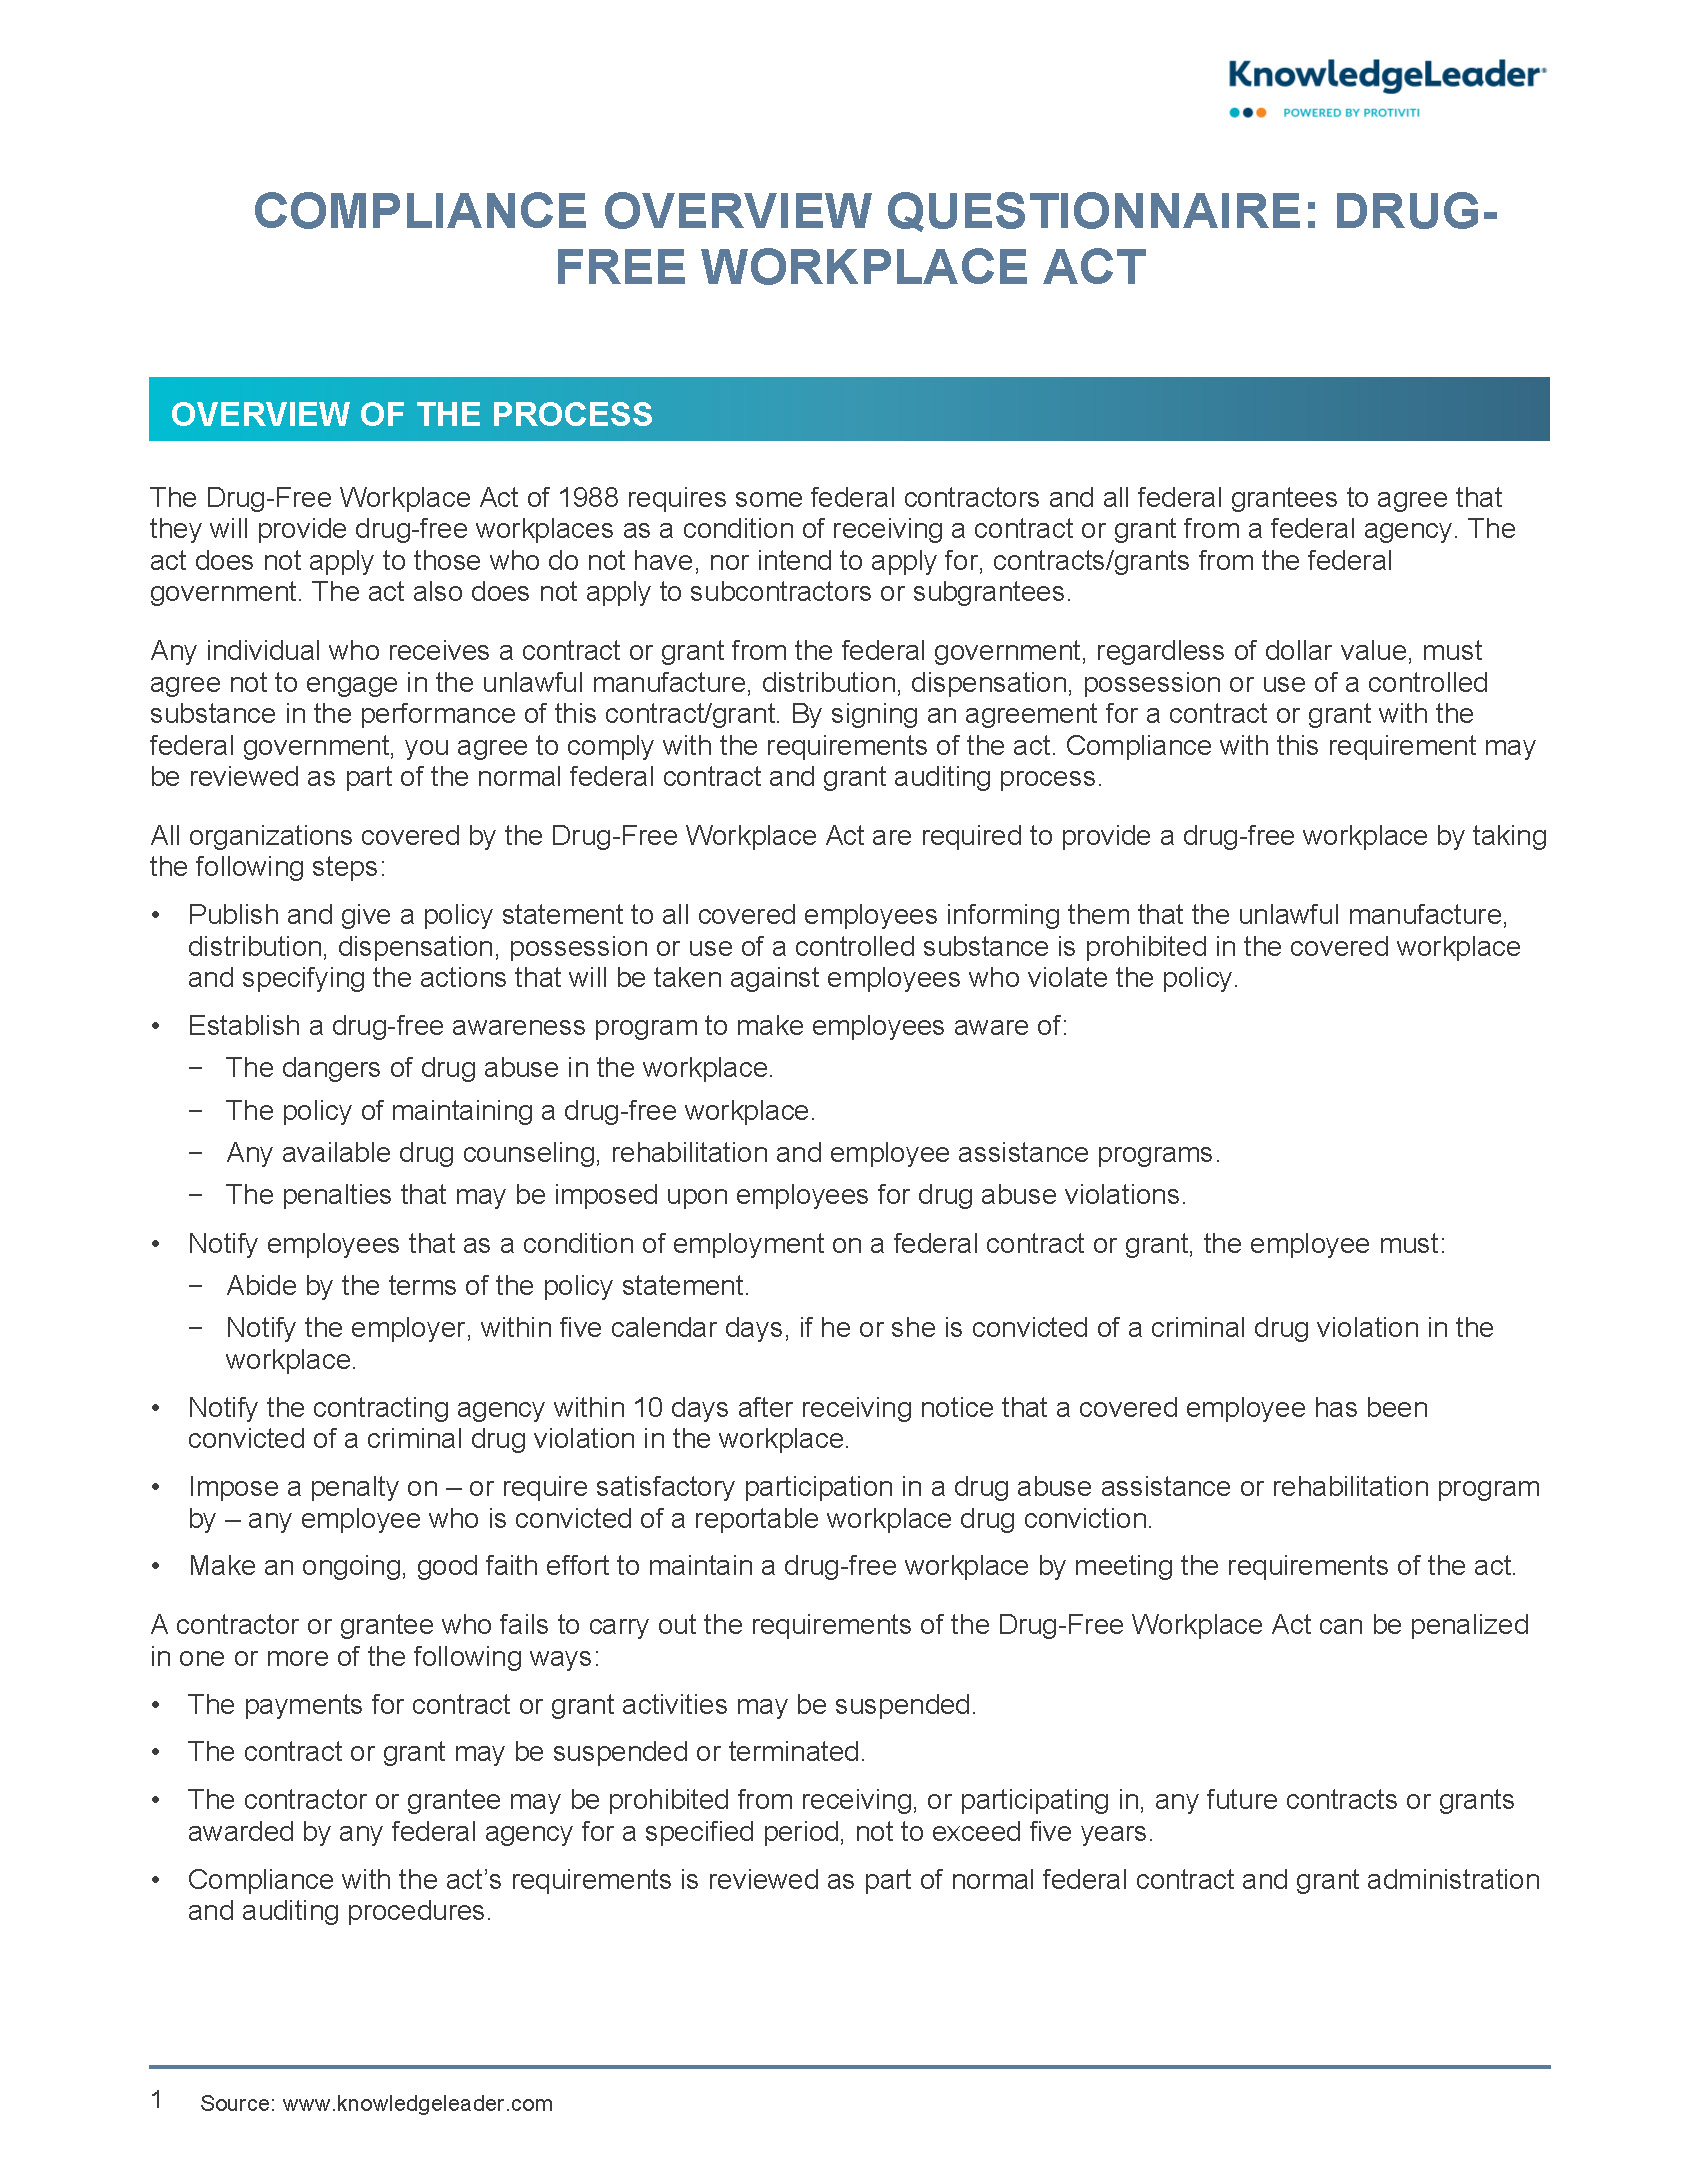 Compliance Overview Questionnaire Drug-Free Workplace Act